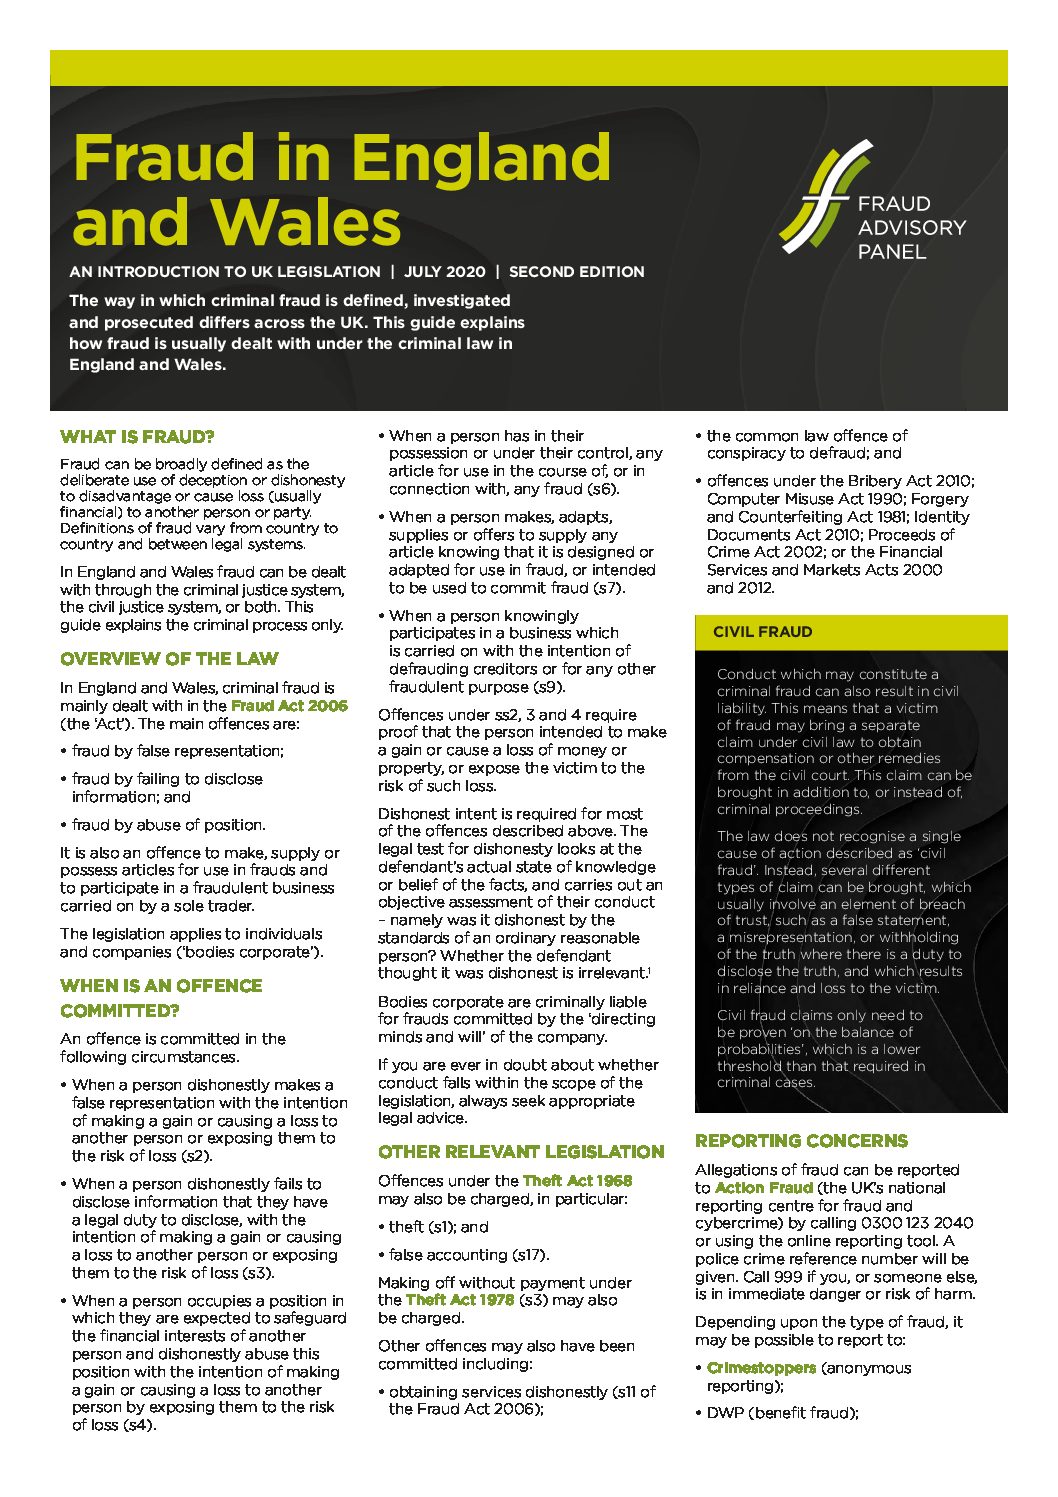 Fraud in England and Wales (2nd ed) July2020 document cover